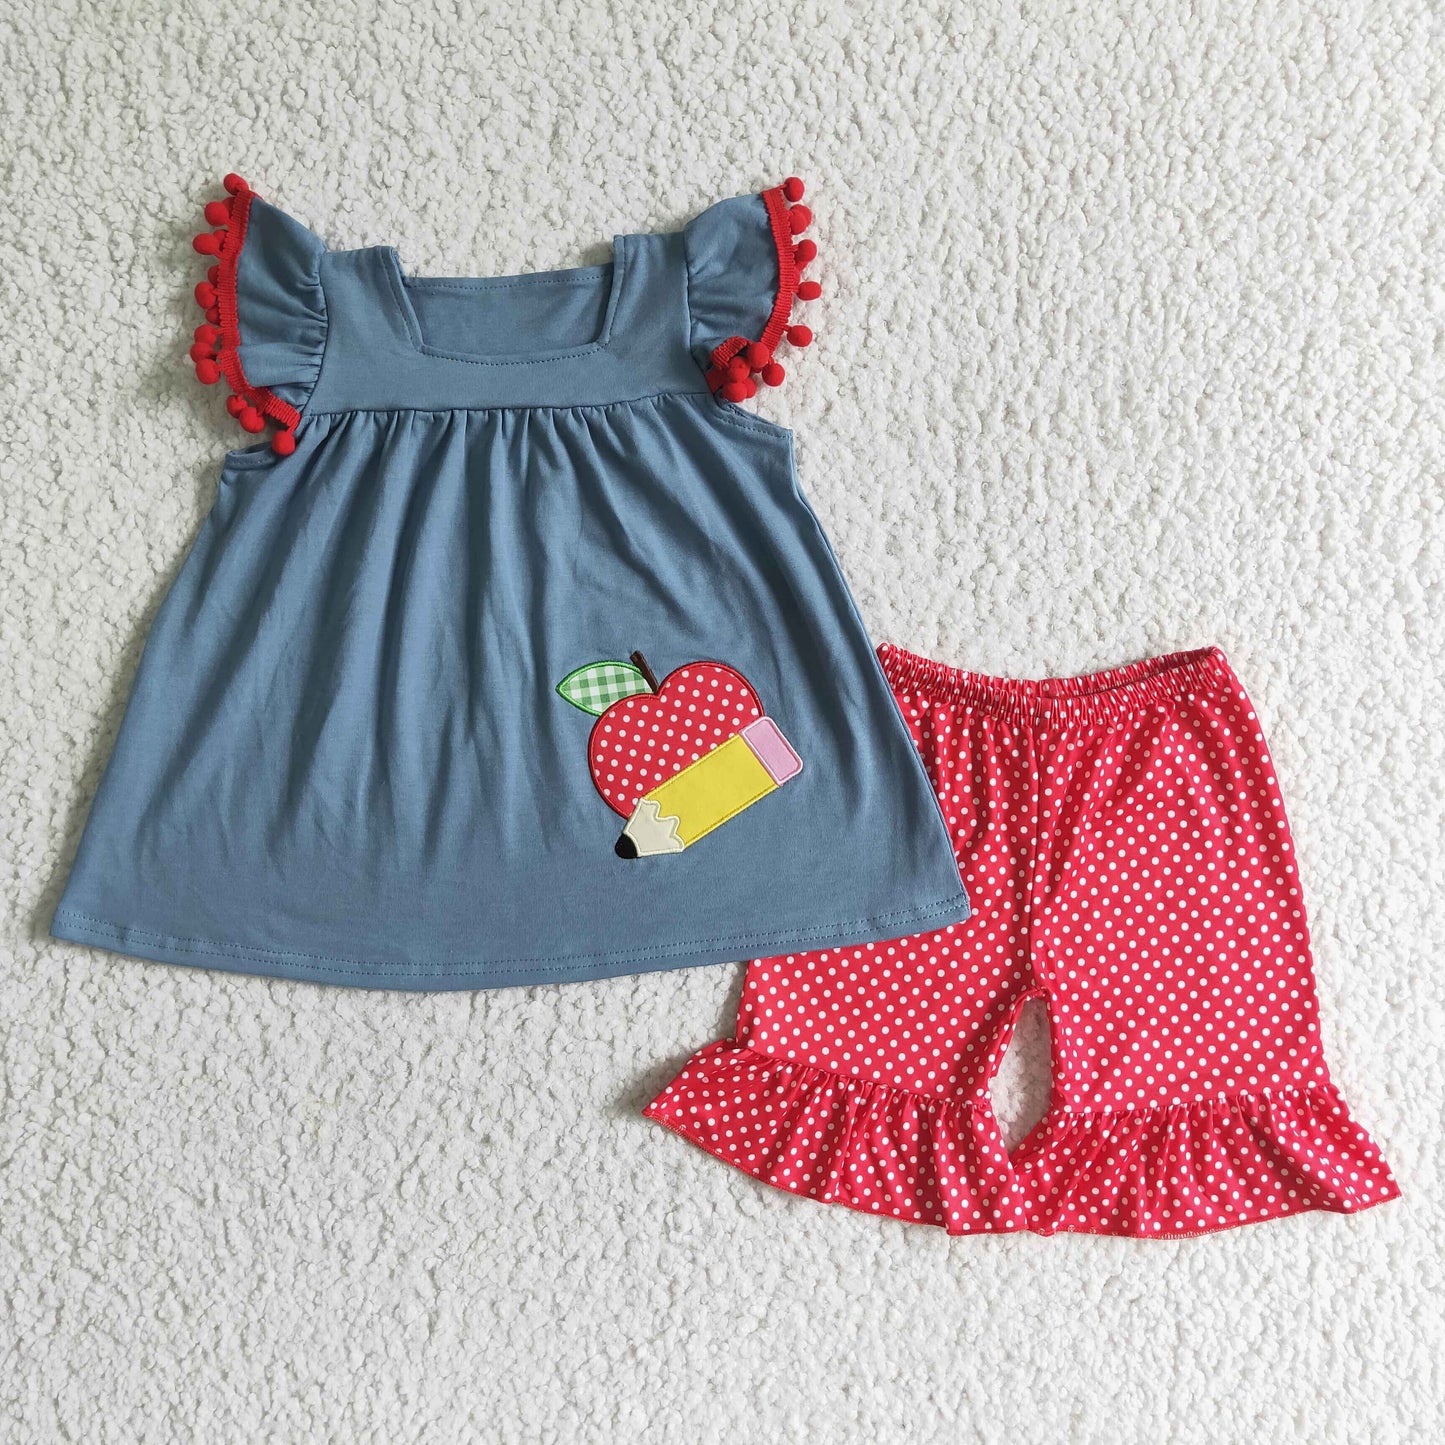 Apple pencil embroidery girls back to school clothing set